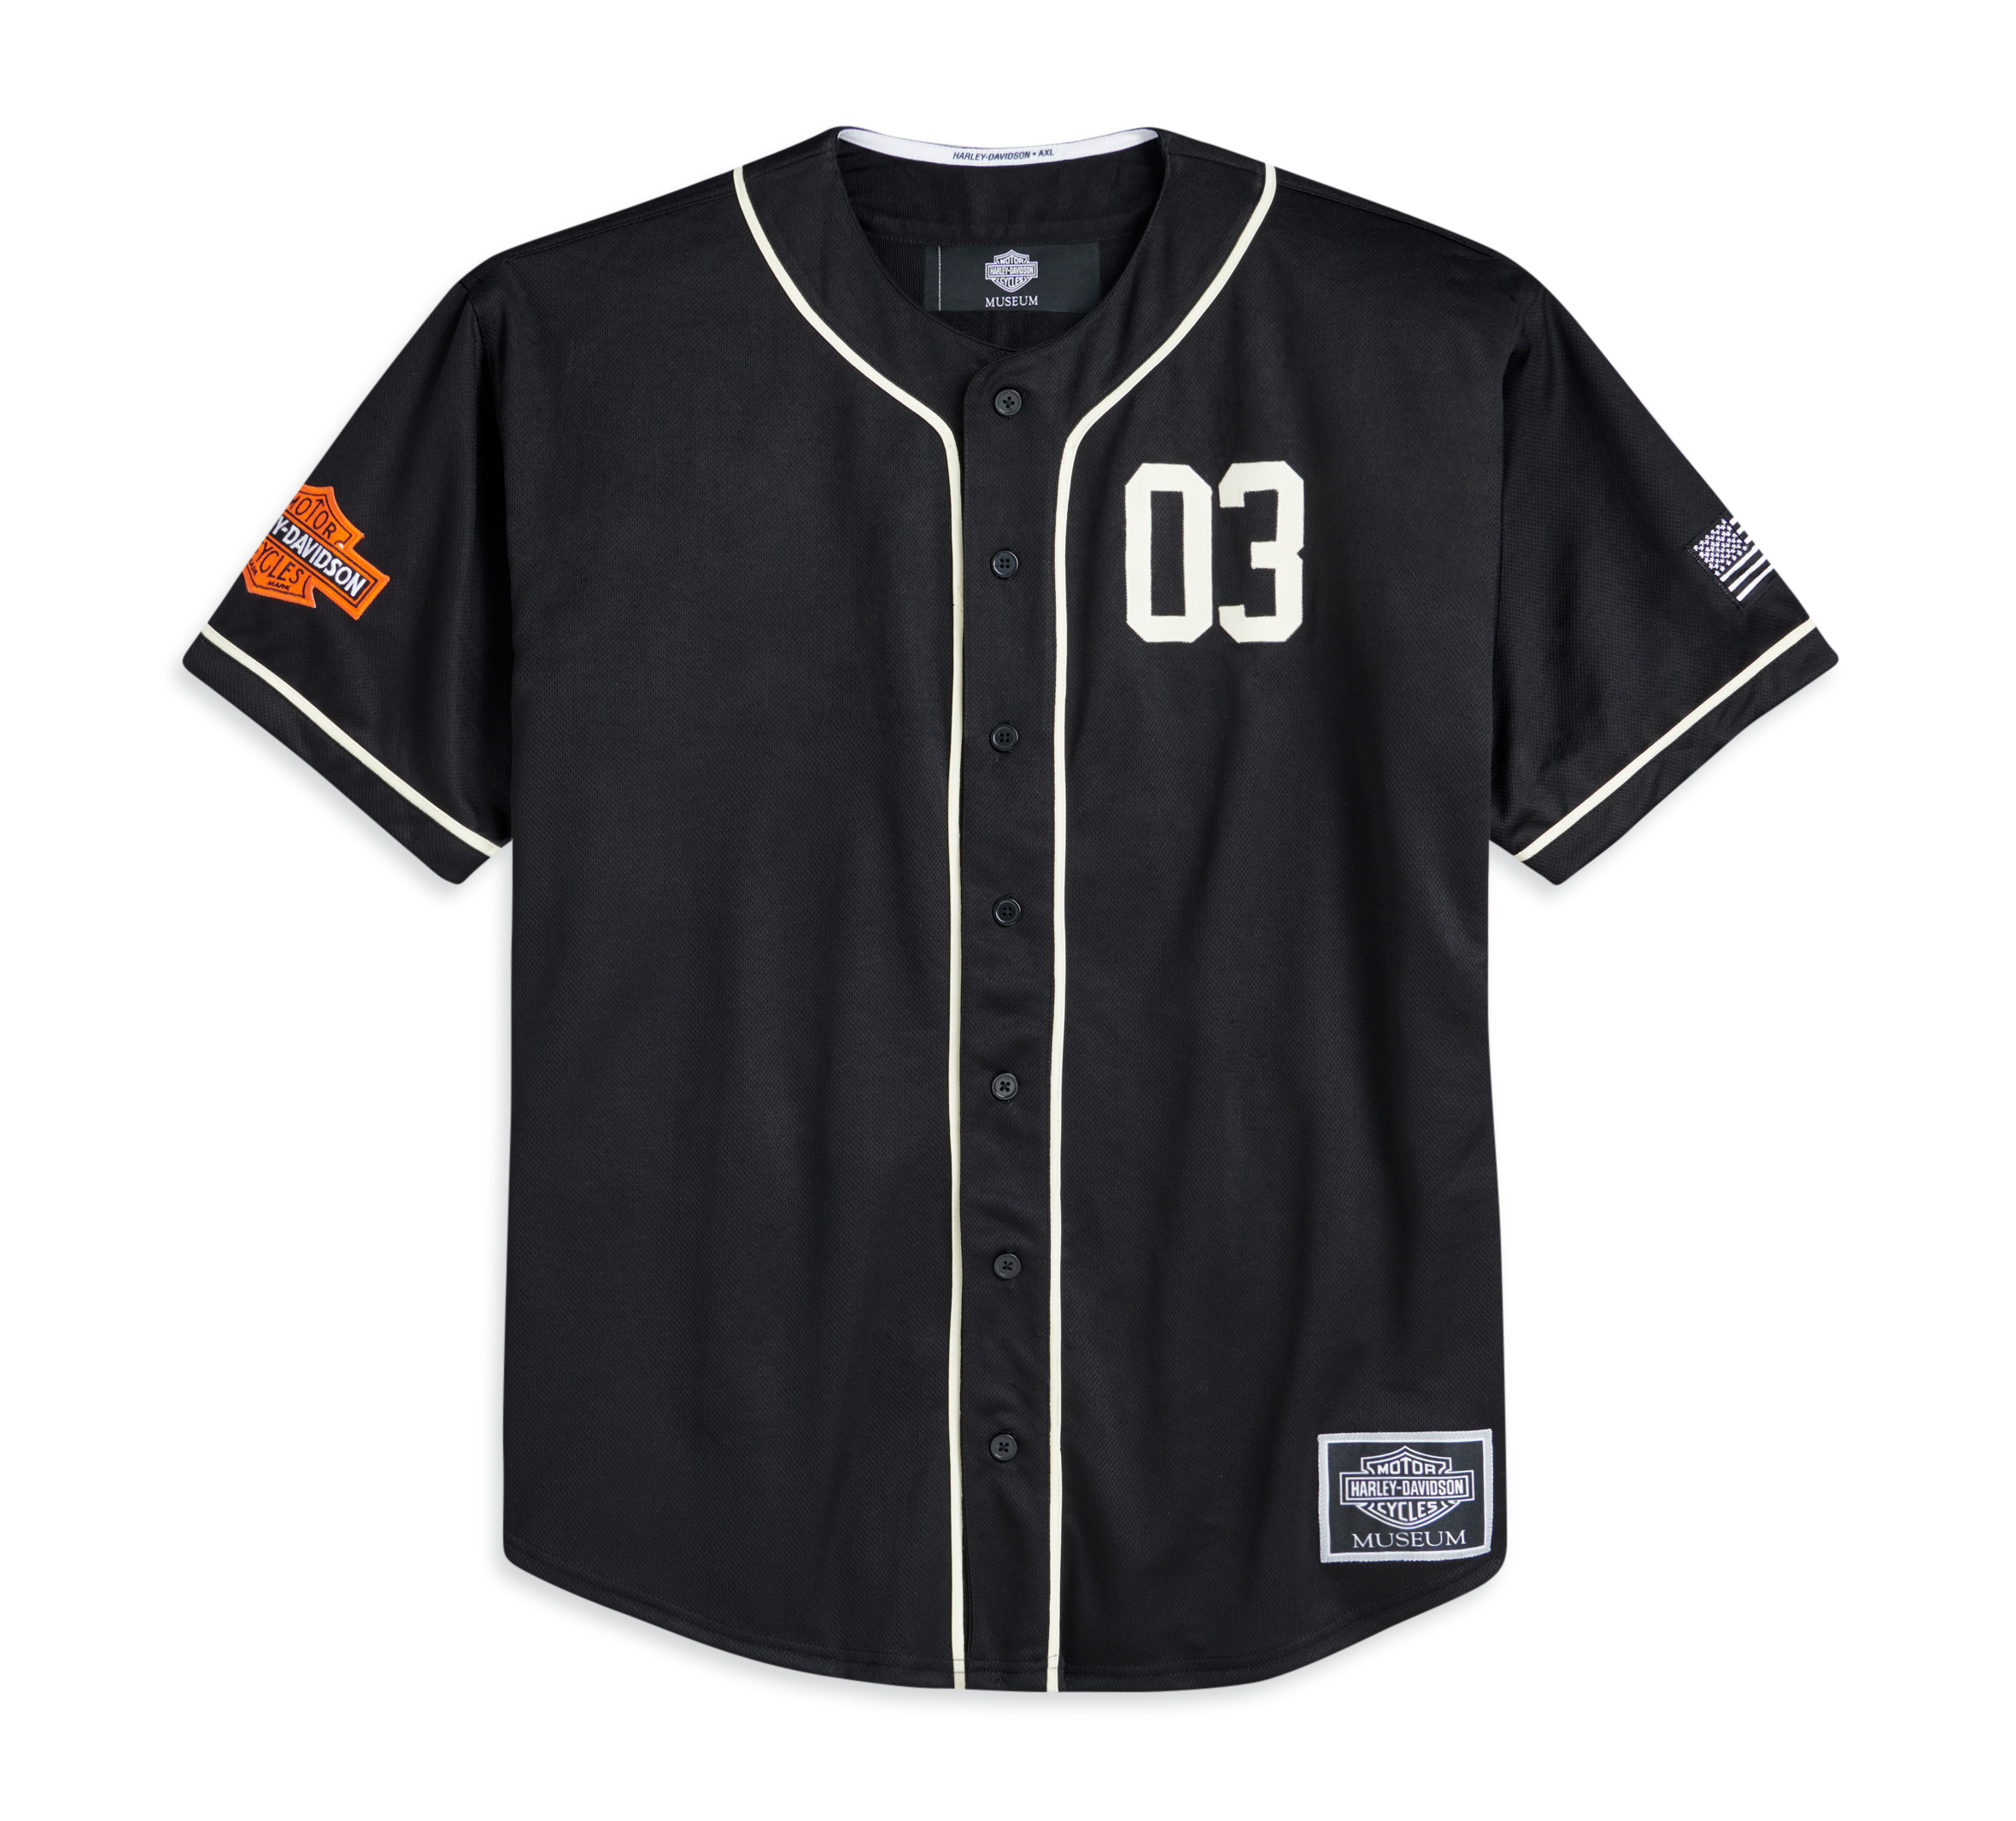 Baseball jersey collection